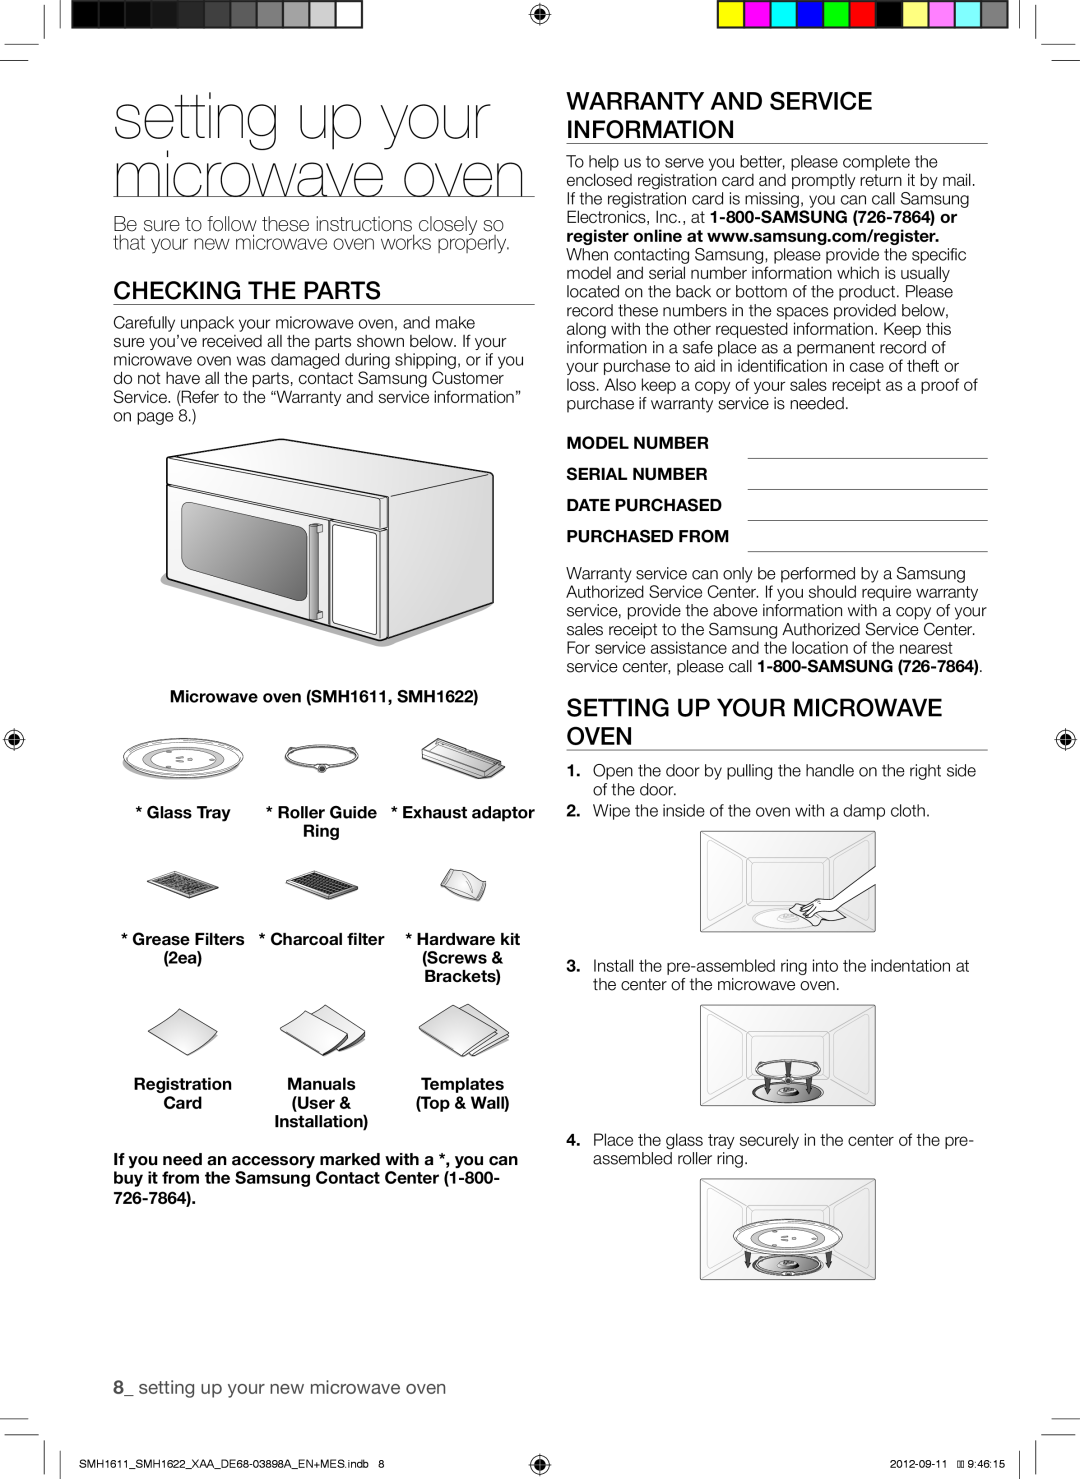 Samsung SMH1622B Checking The Parts, Warranty And Service Information, Setting Up Your Microwave Oven, Glass Tray, Ring 